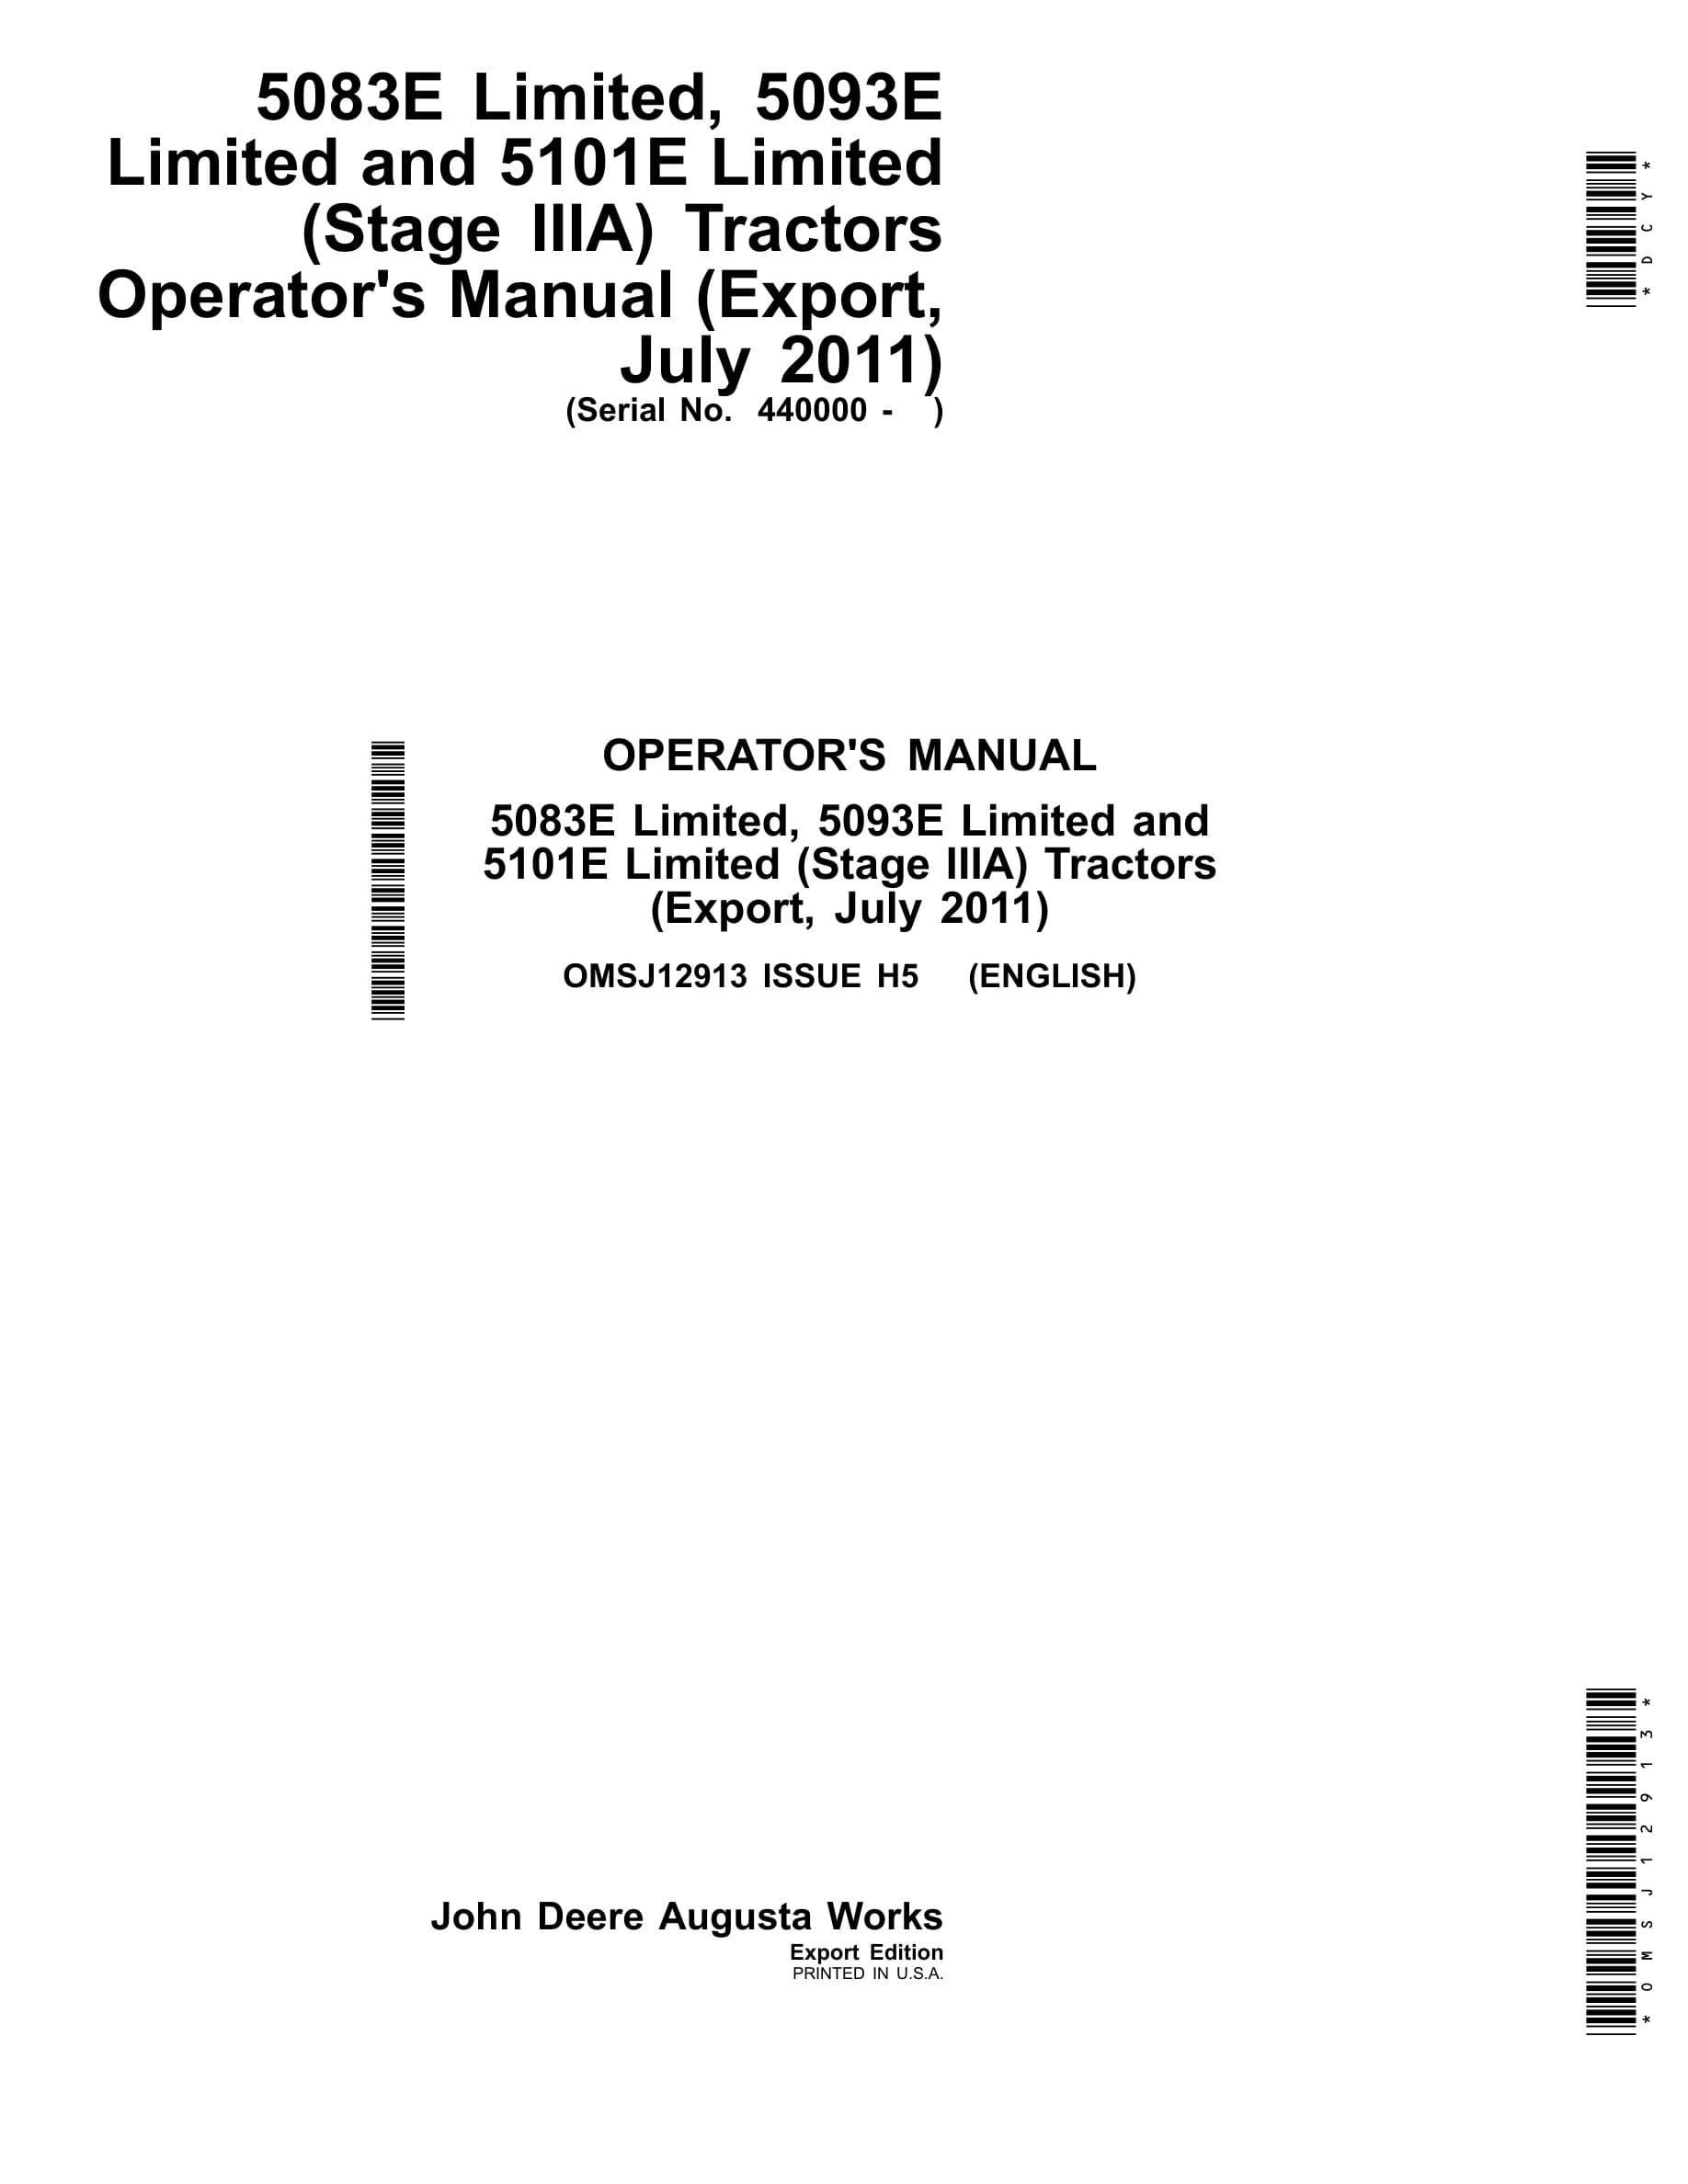 John Deere 5083e Limited, 5093e Limited And 5101e Limited (stage Ii) Tractors Operator Manuals OMSJ12913-1